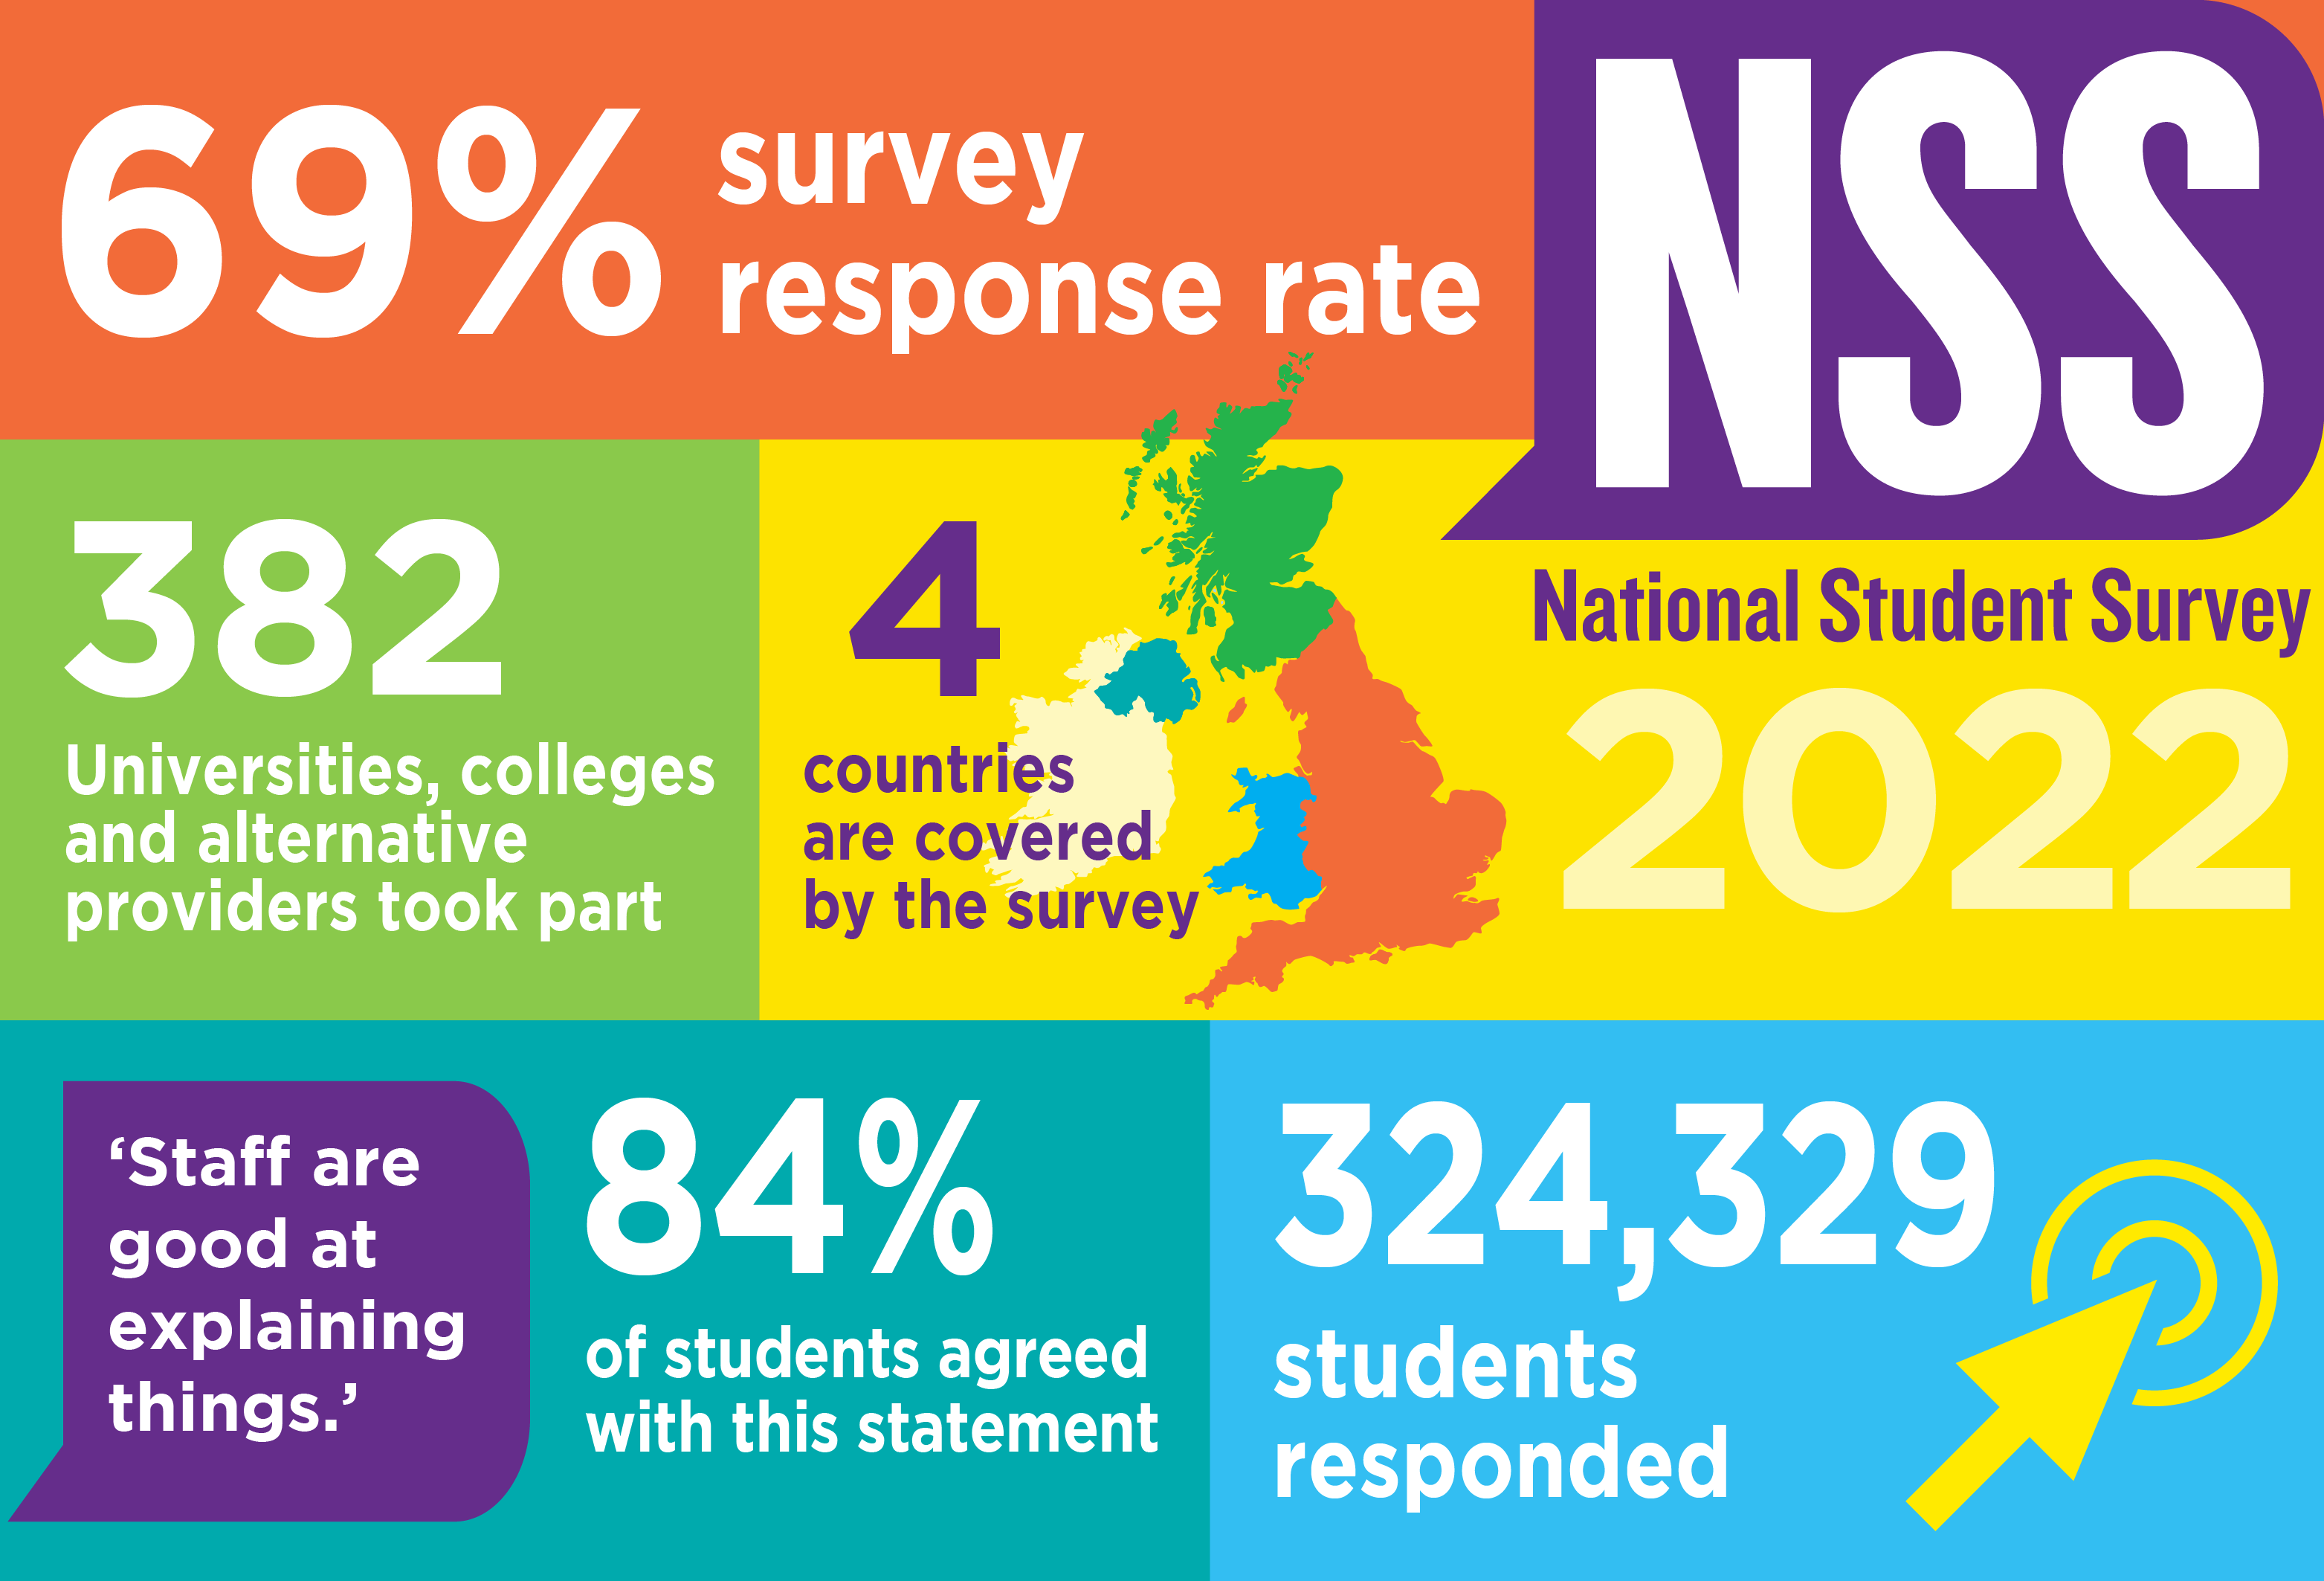 NSS 2022 infographic on 2022 data, showing 69% response rate